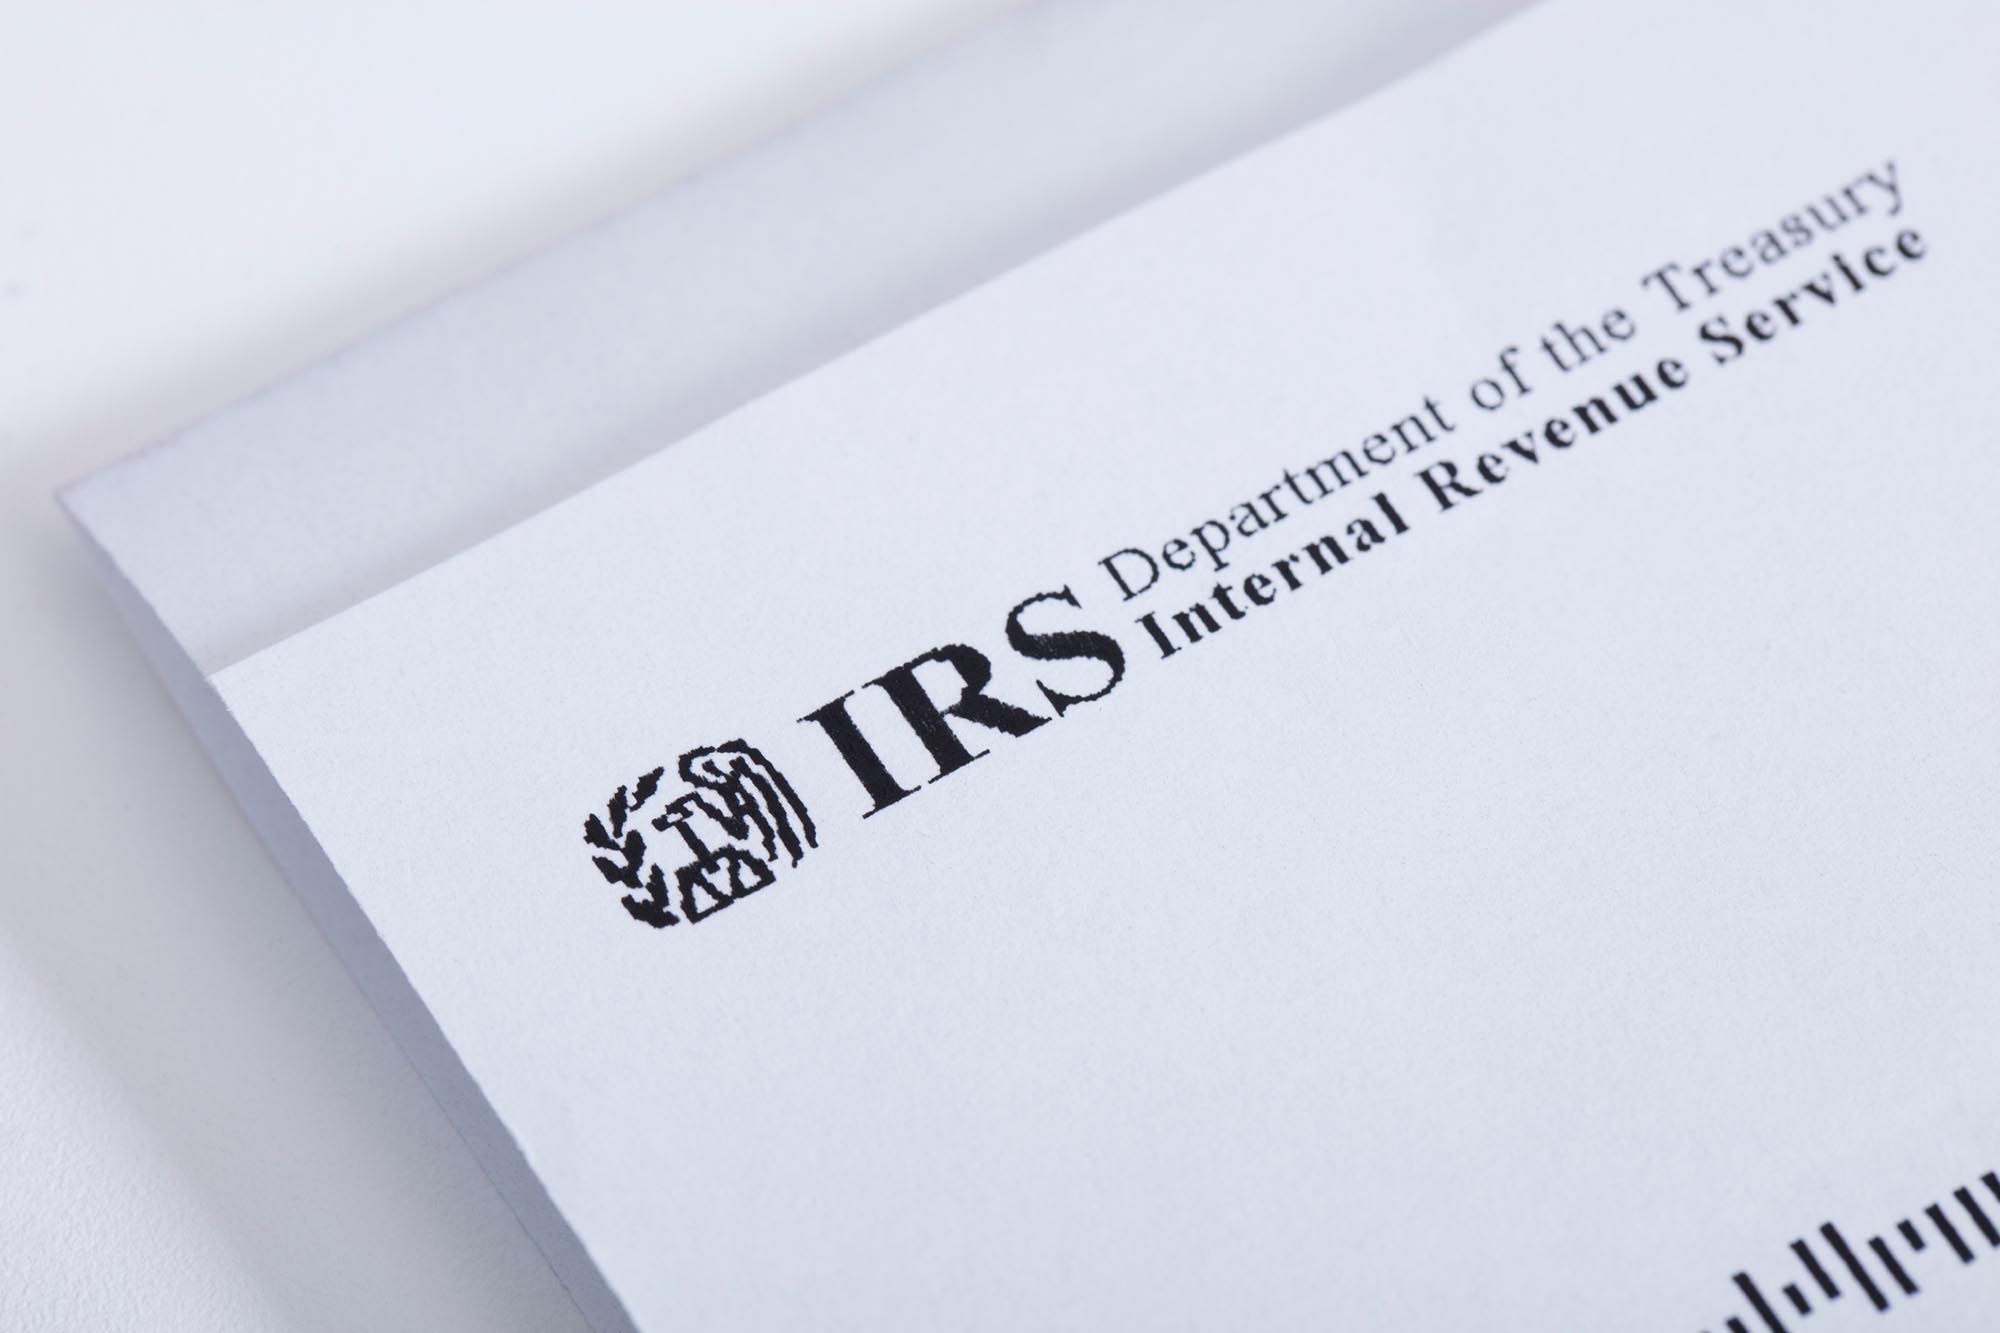 A closeup of the letterhead from the IRS notice